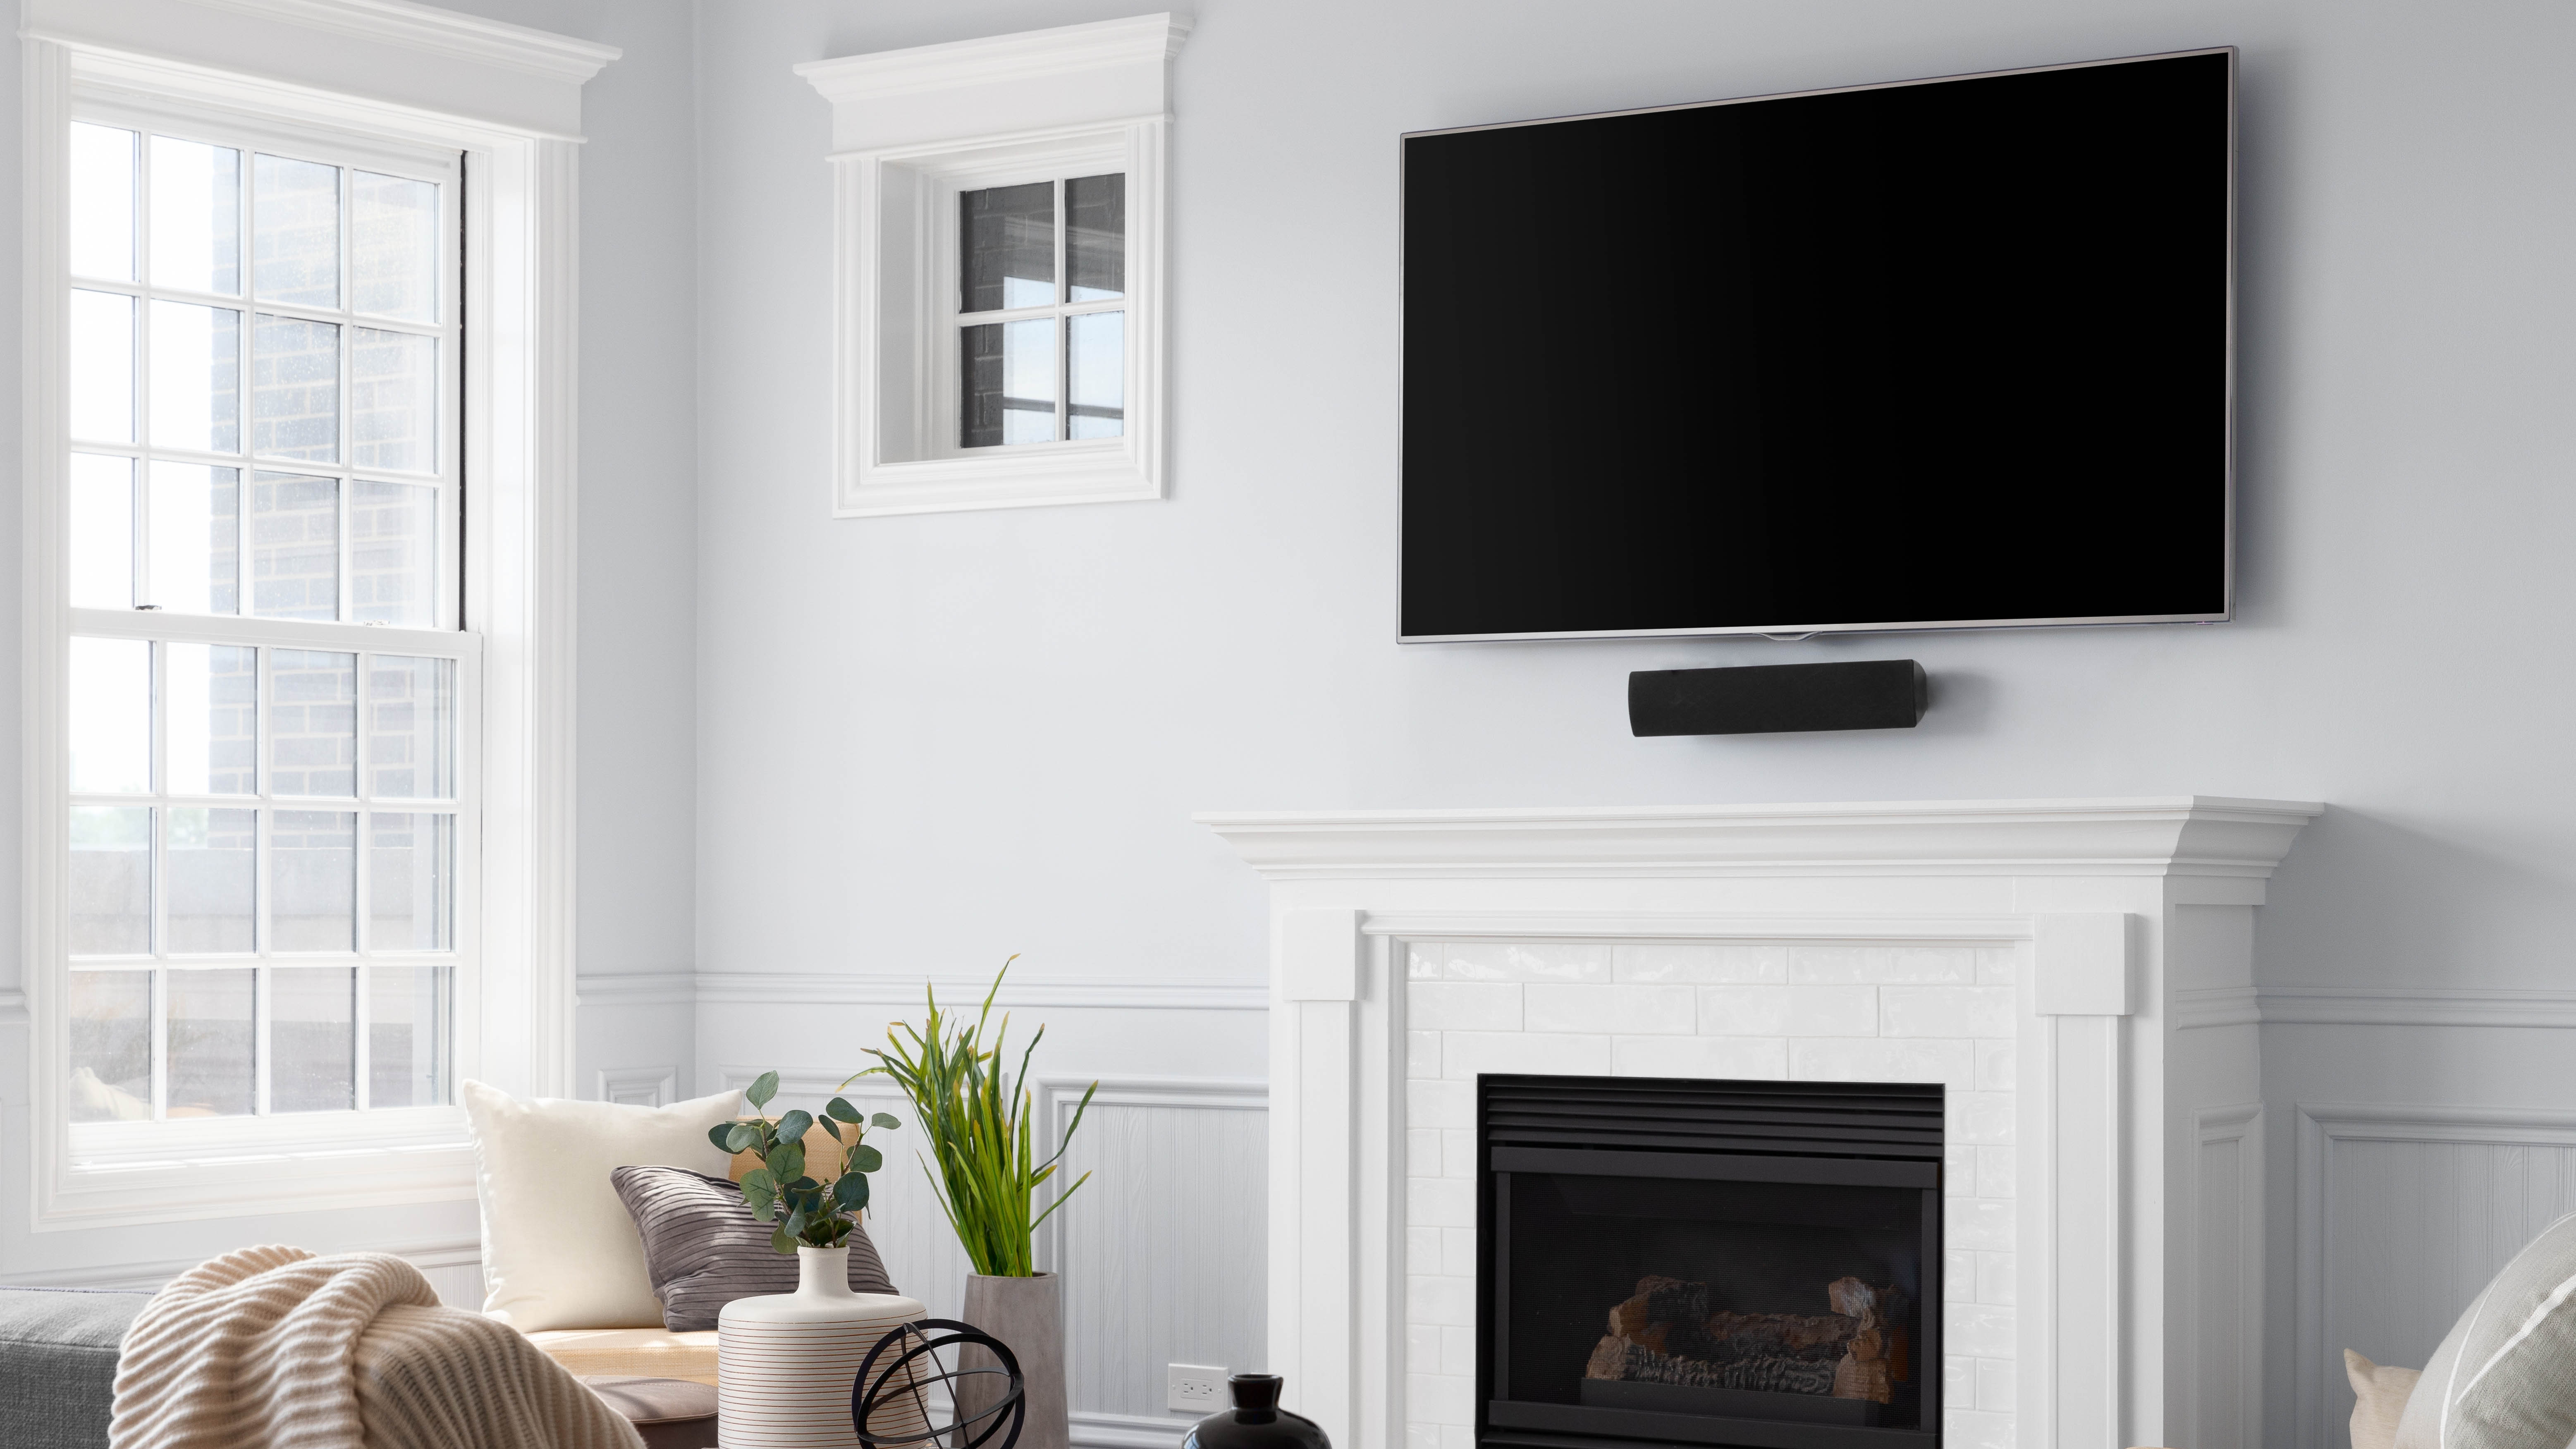 7 clever ways to decorate around a TV